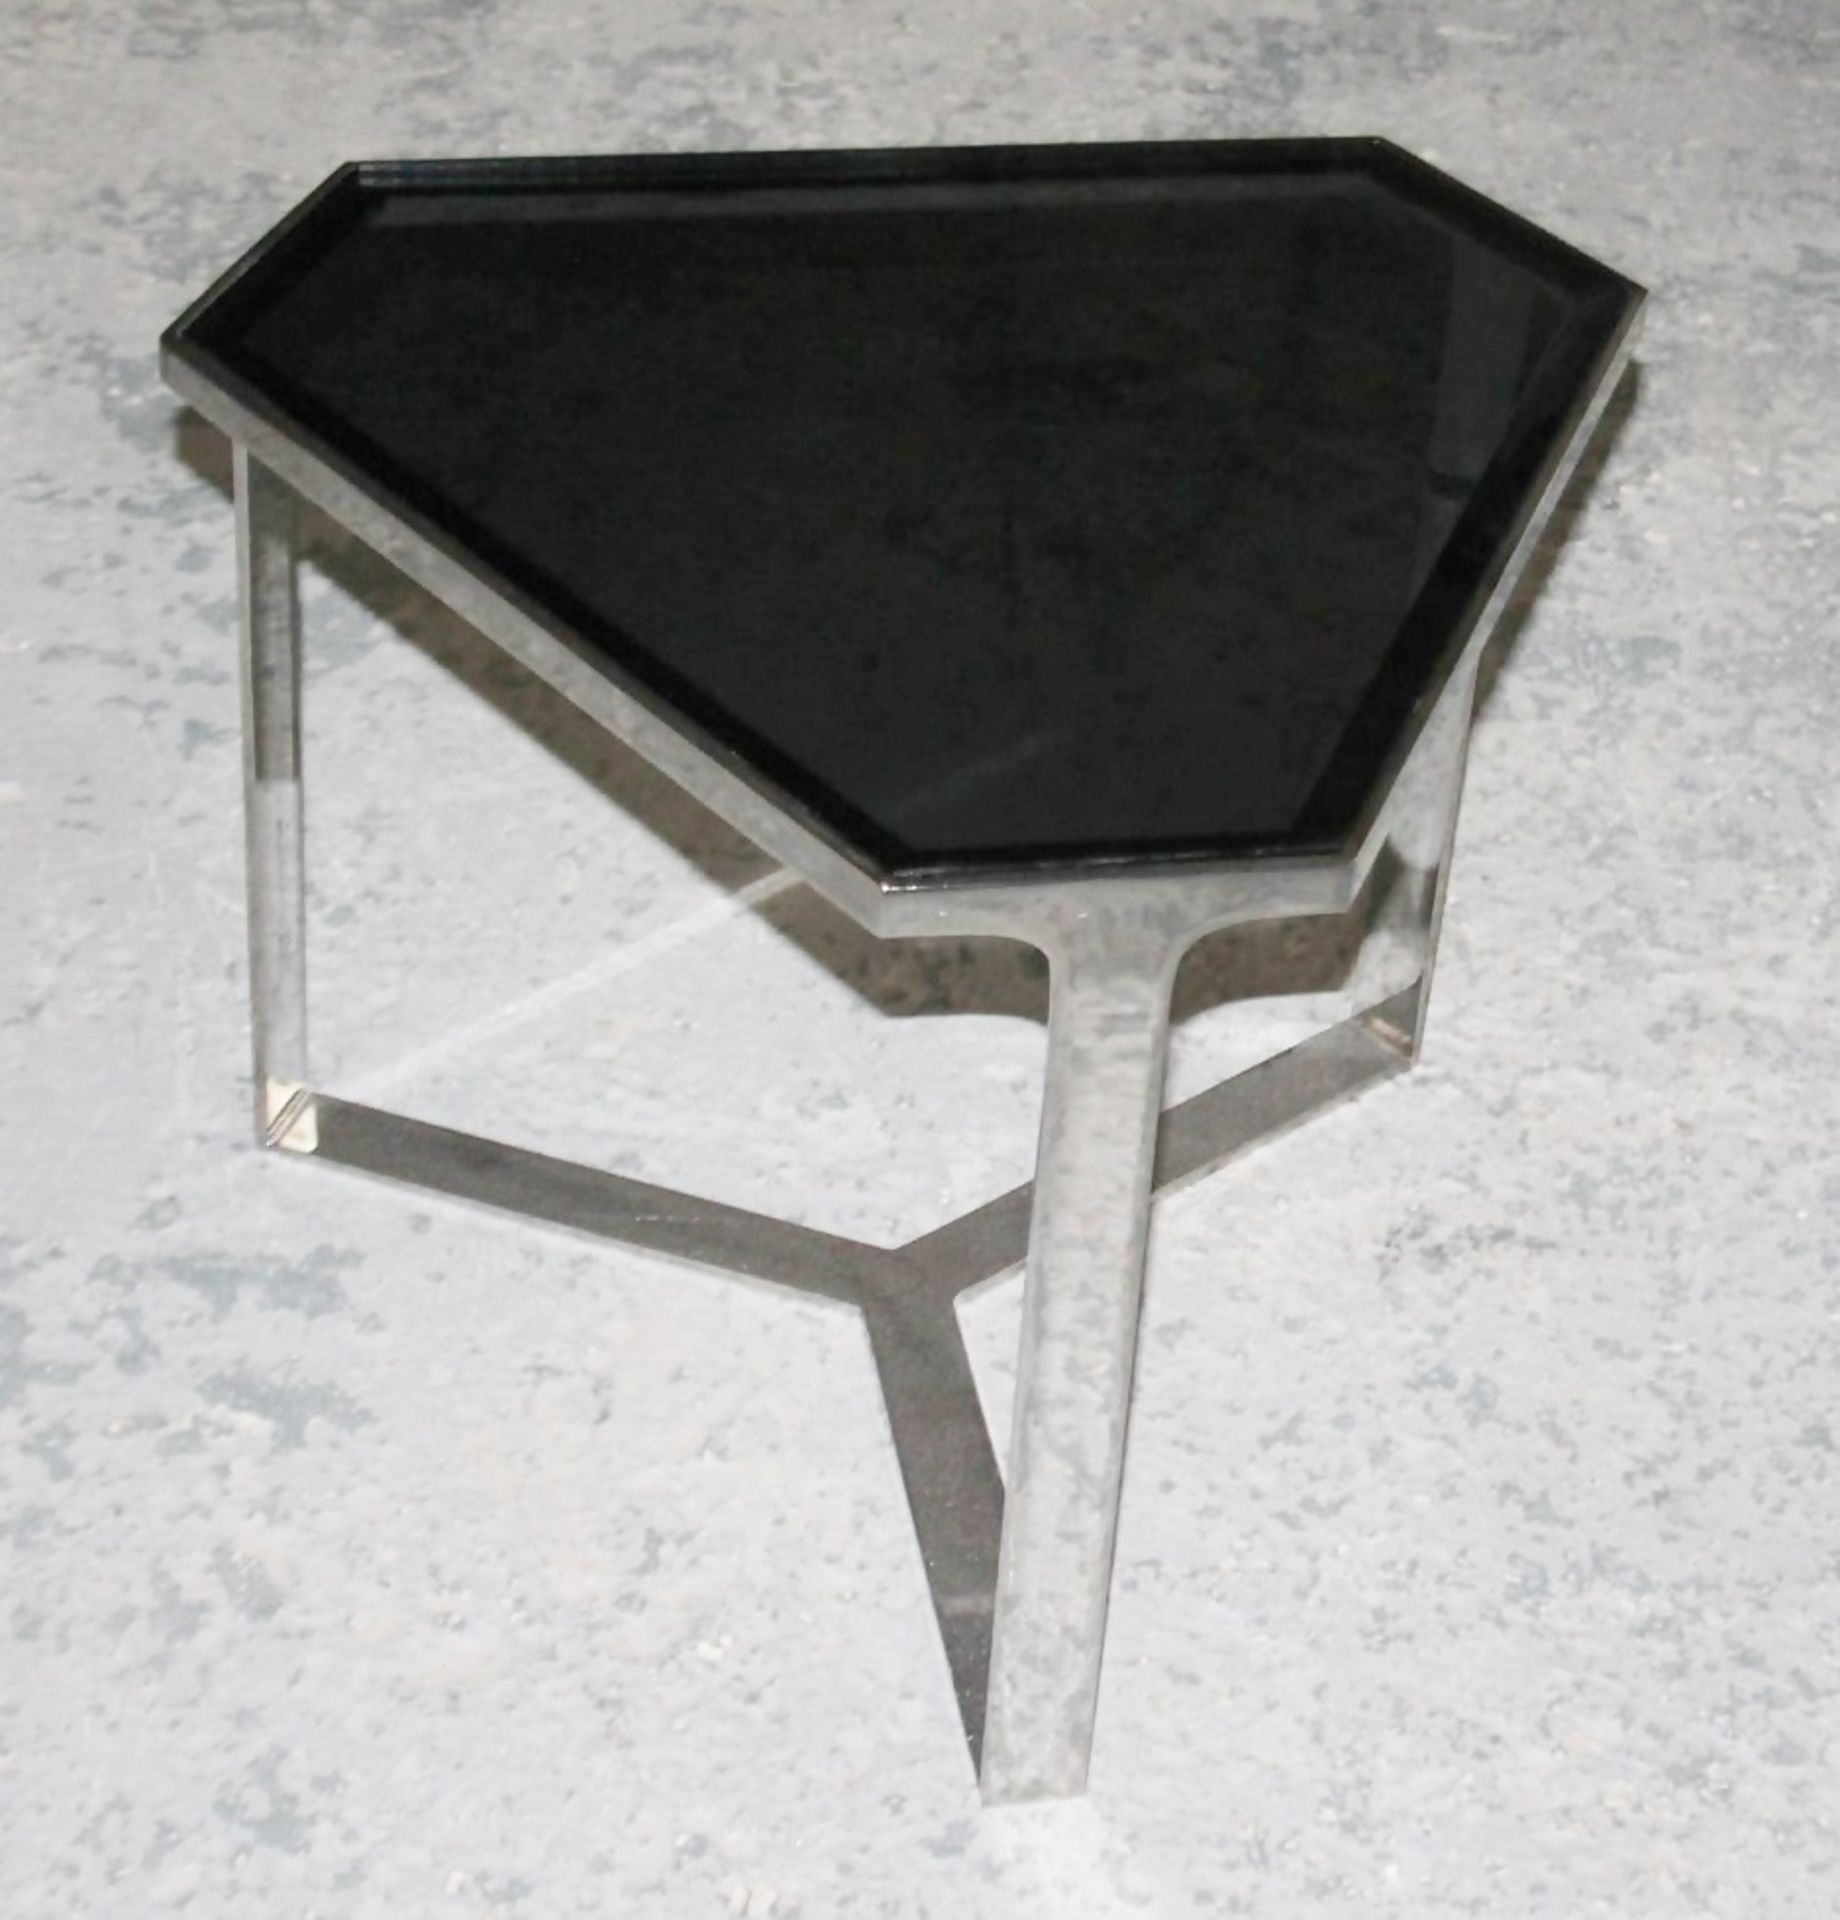 1 x Designer 5-Section Geometric Coffee Table, With Tinted Glass Tops and Chromed Bases - Image 5 of 6